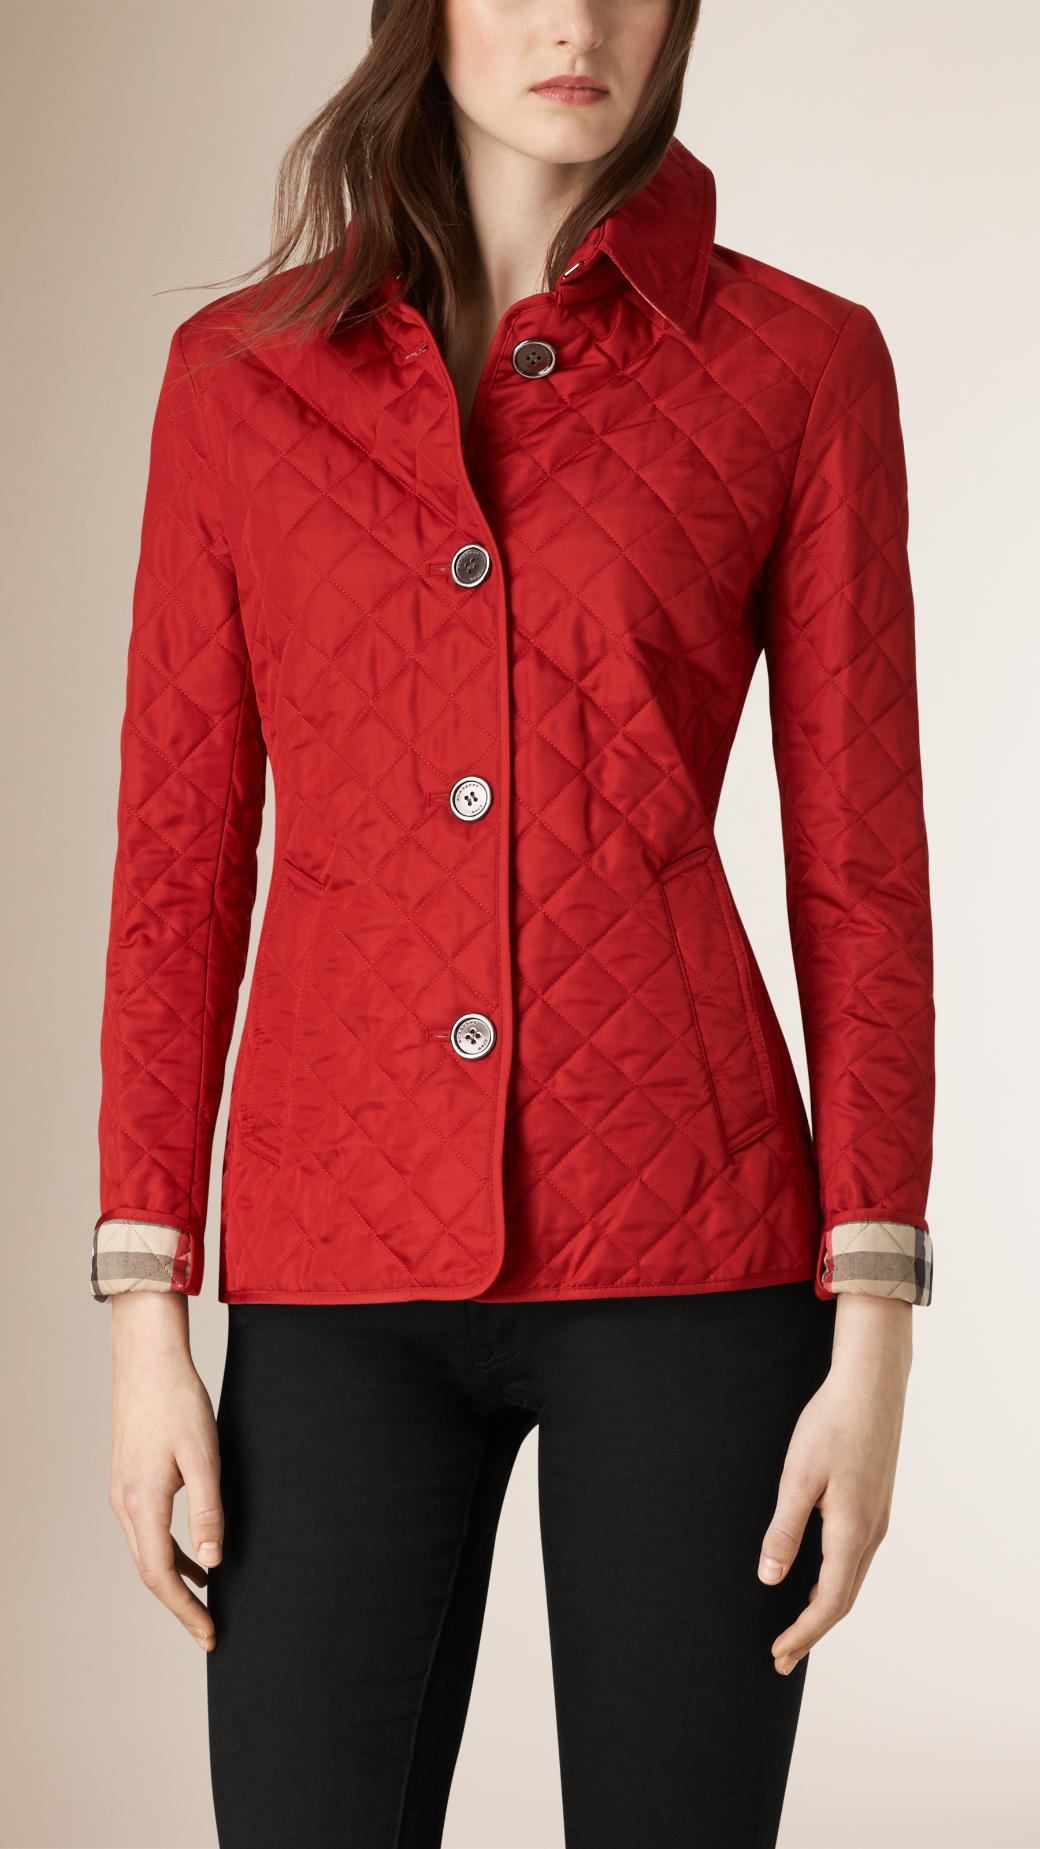 Burberry Diamond Quilted Jacket in Red | Lyst